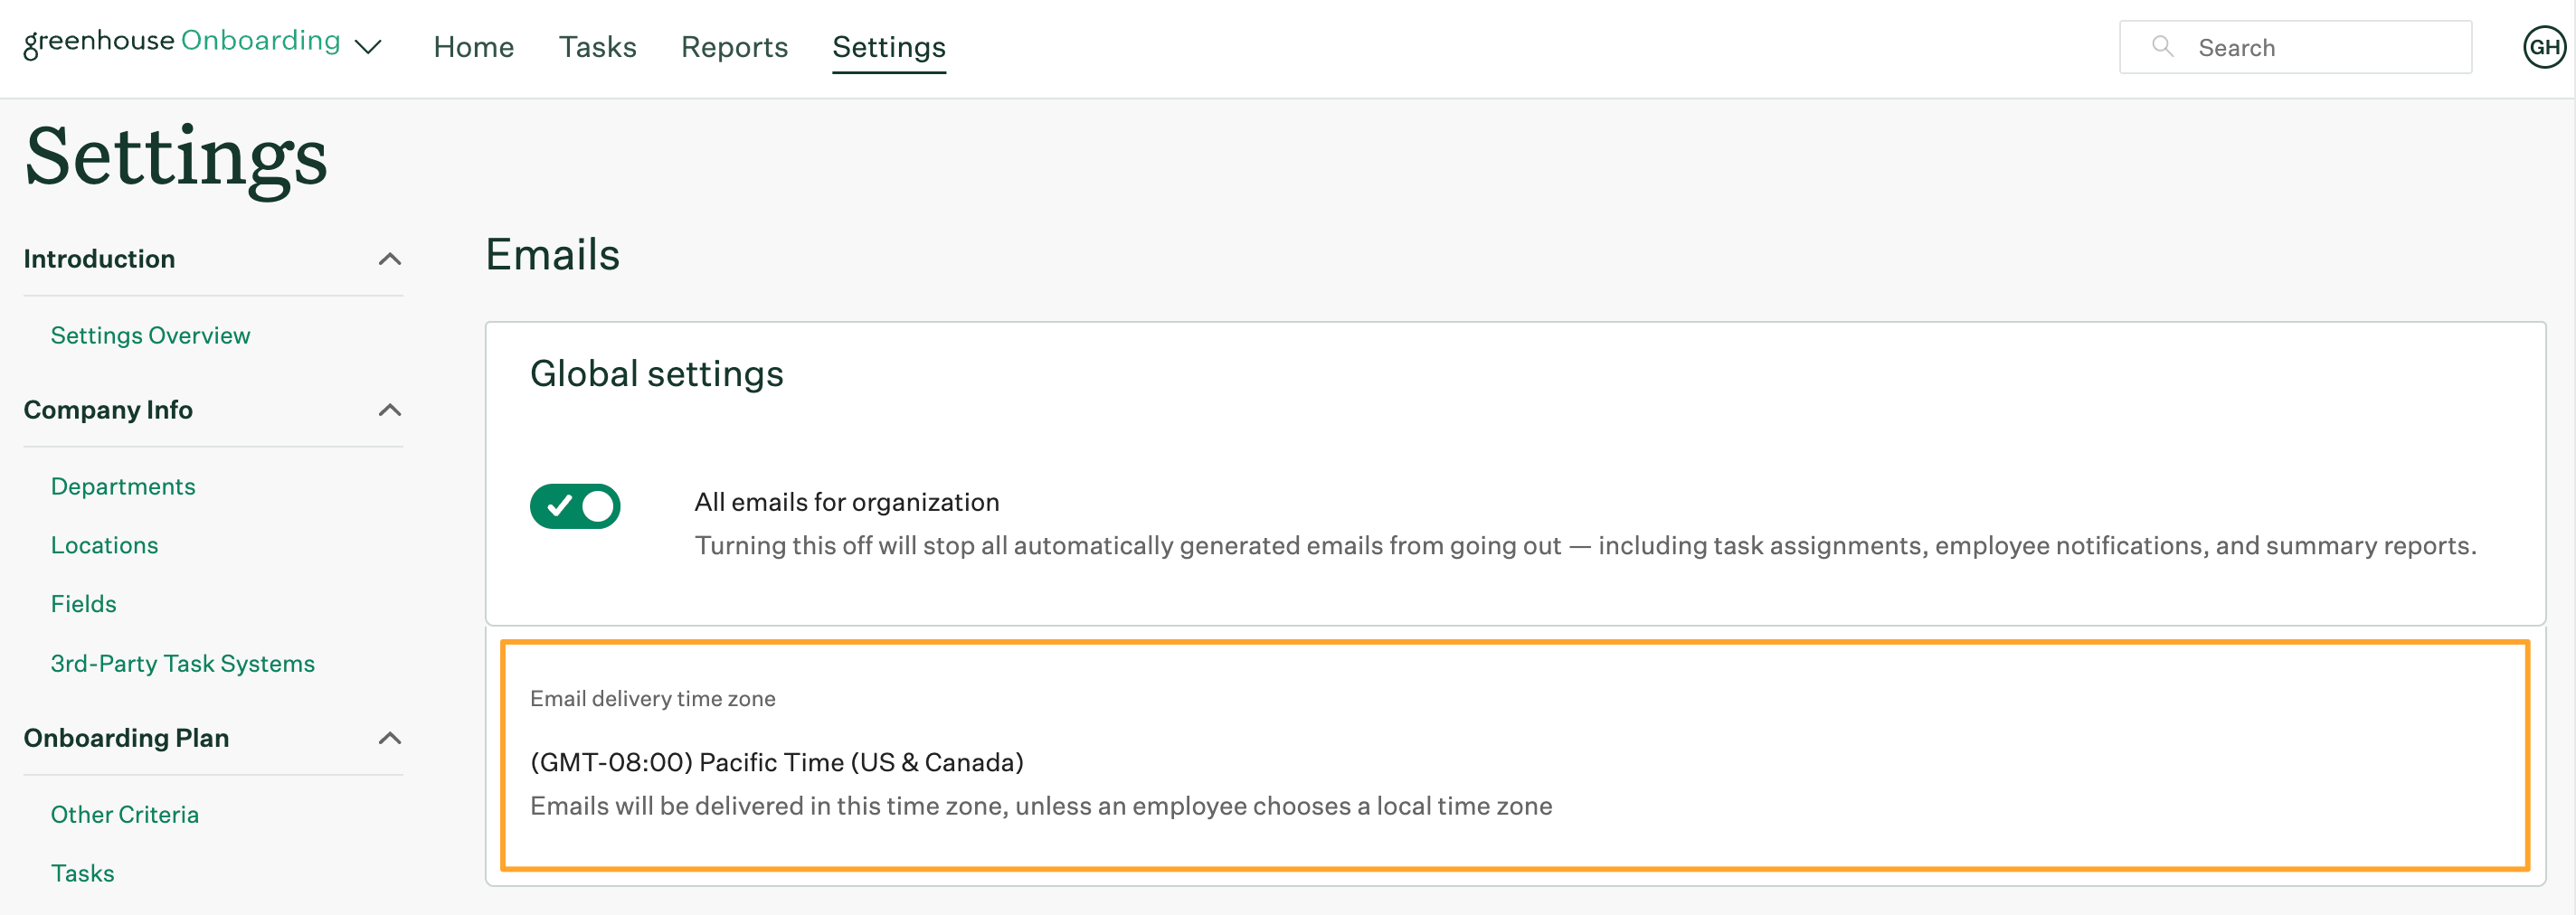 Screenshot-of-email-settings-page-with-email-delivery-time-zone-section-highlighted.png